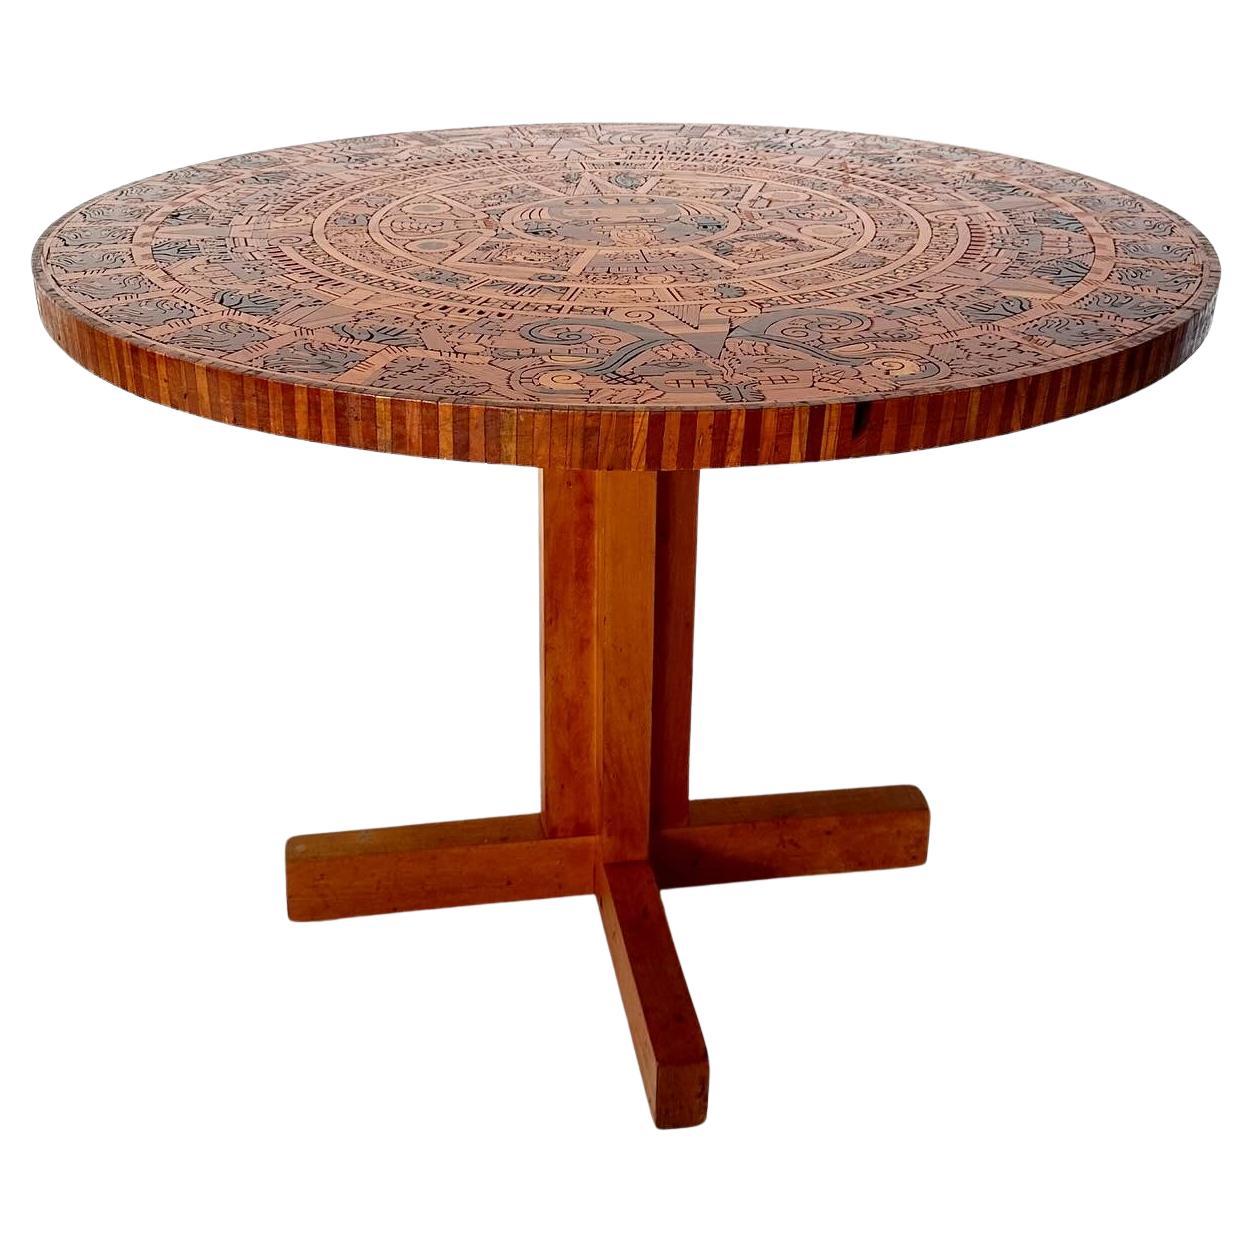 Handcrafted Wooden Inlay Aztec Calendar Dining Table For Sale